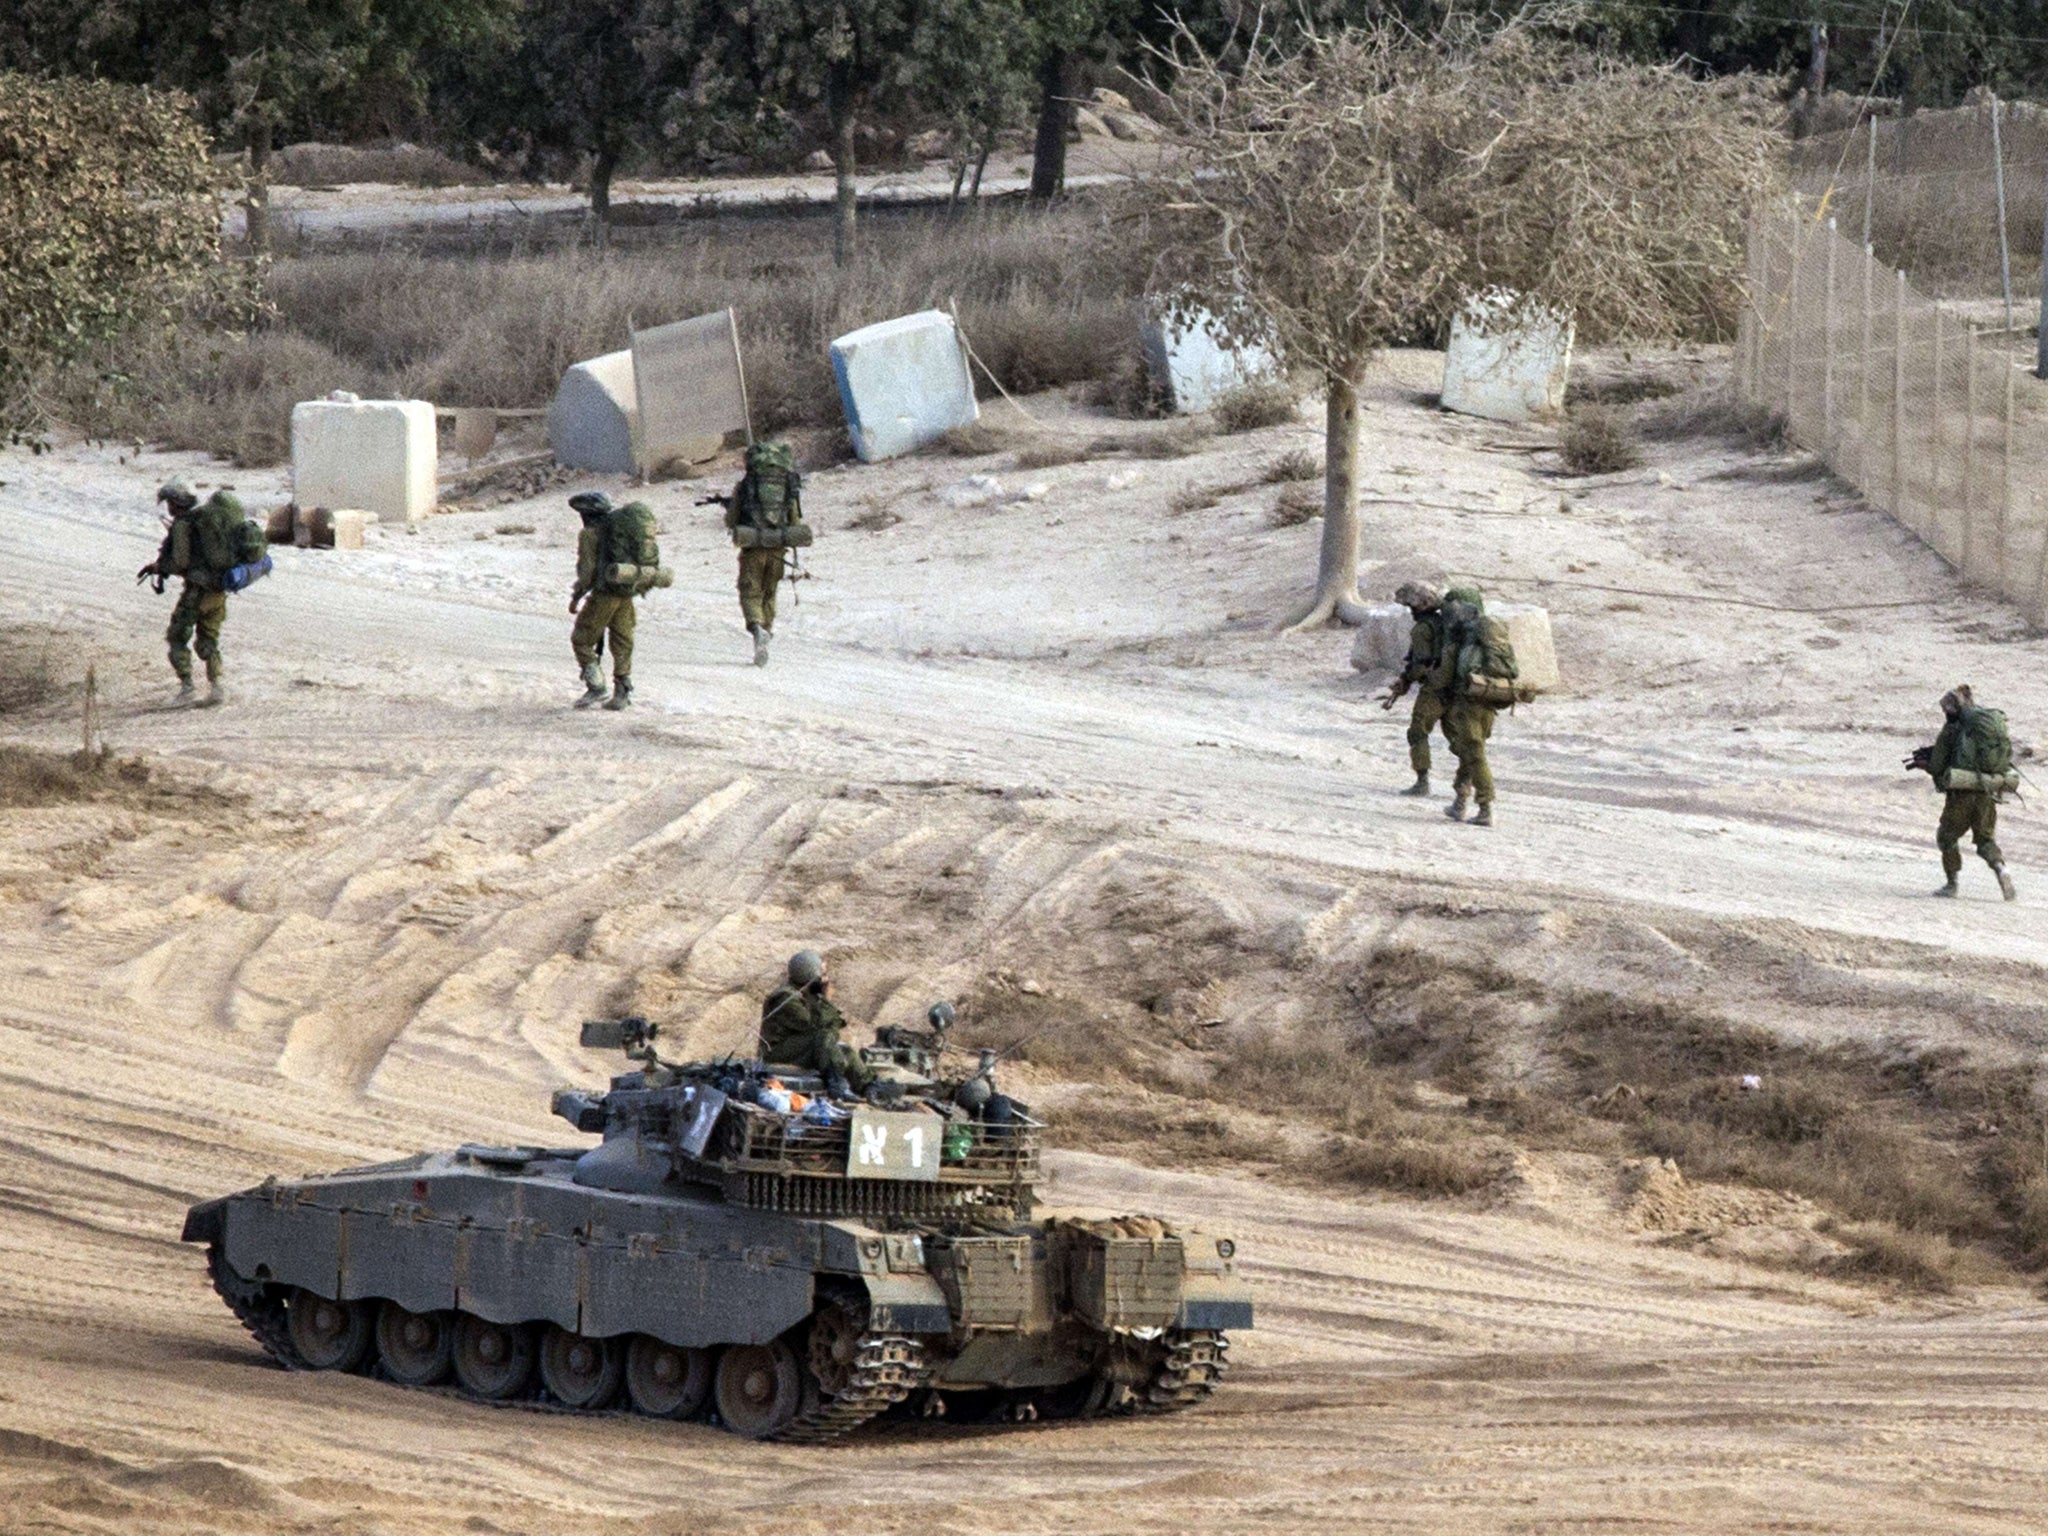 Israeli soldiers walk along Israel's border with the Gaza Strip, on August 4, 2014